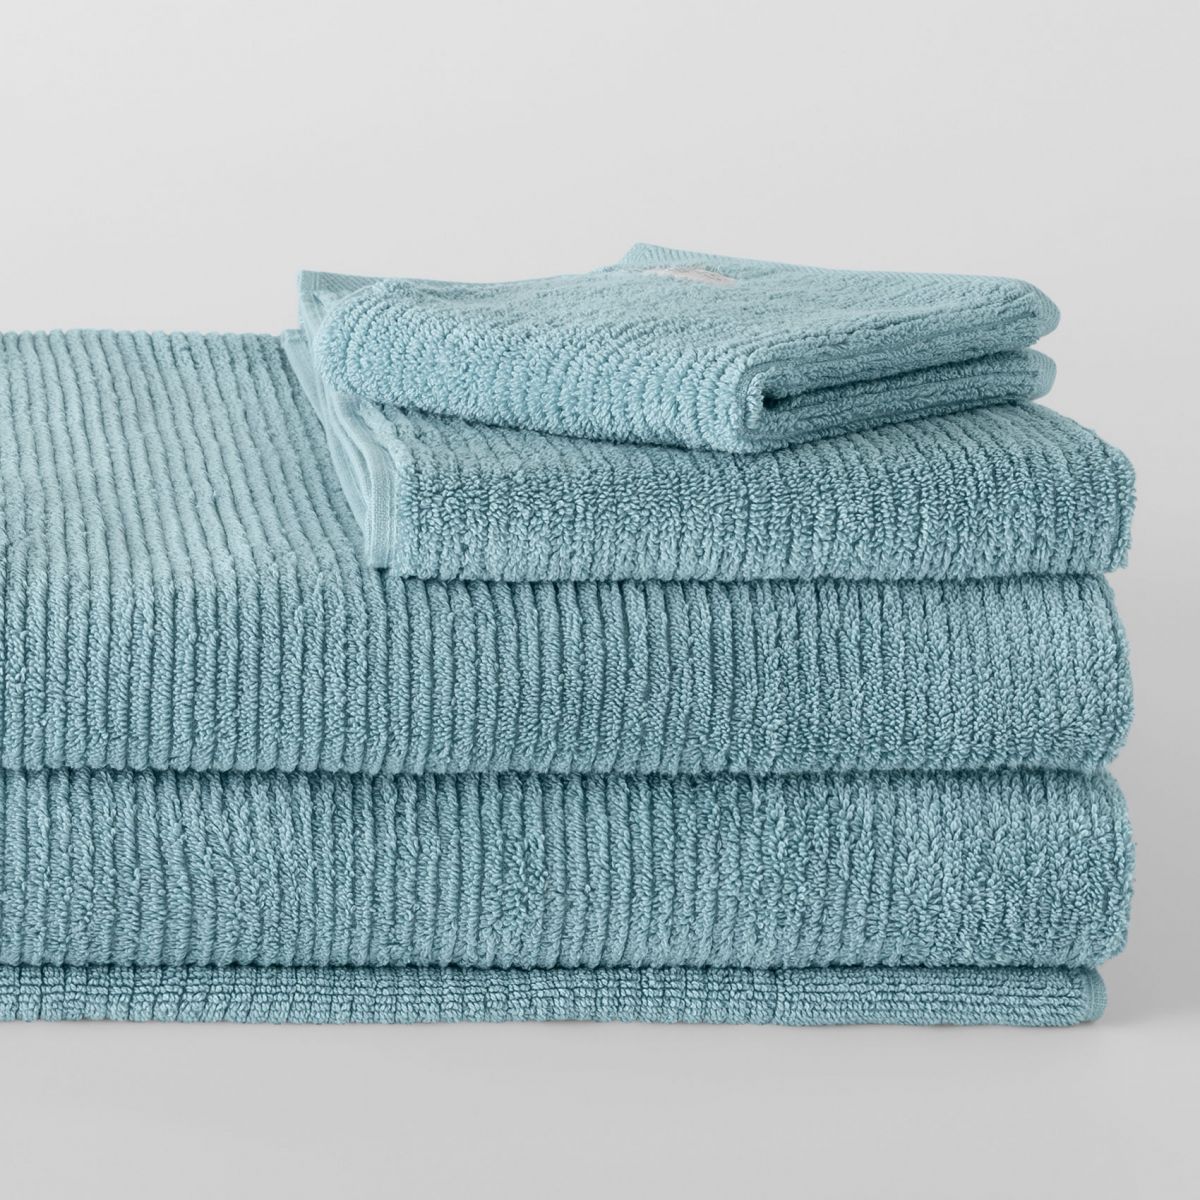 Sheridan Living Textures Towel Collection - Misty Teal